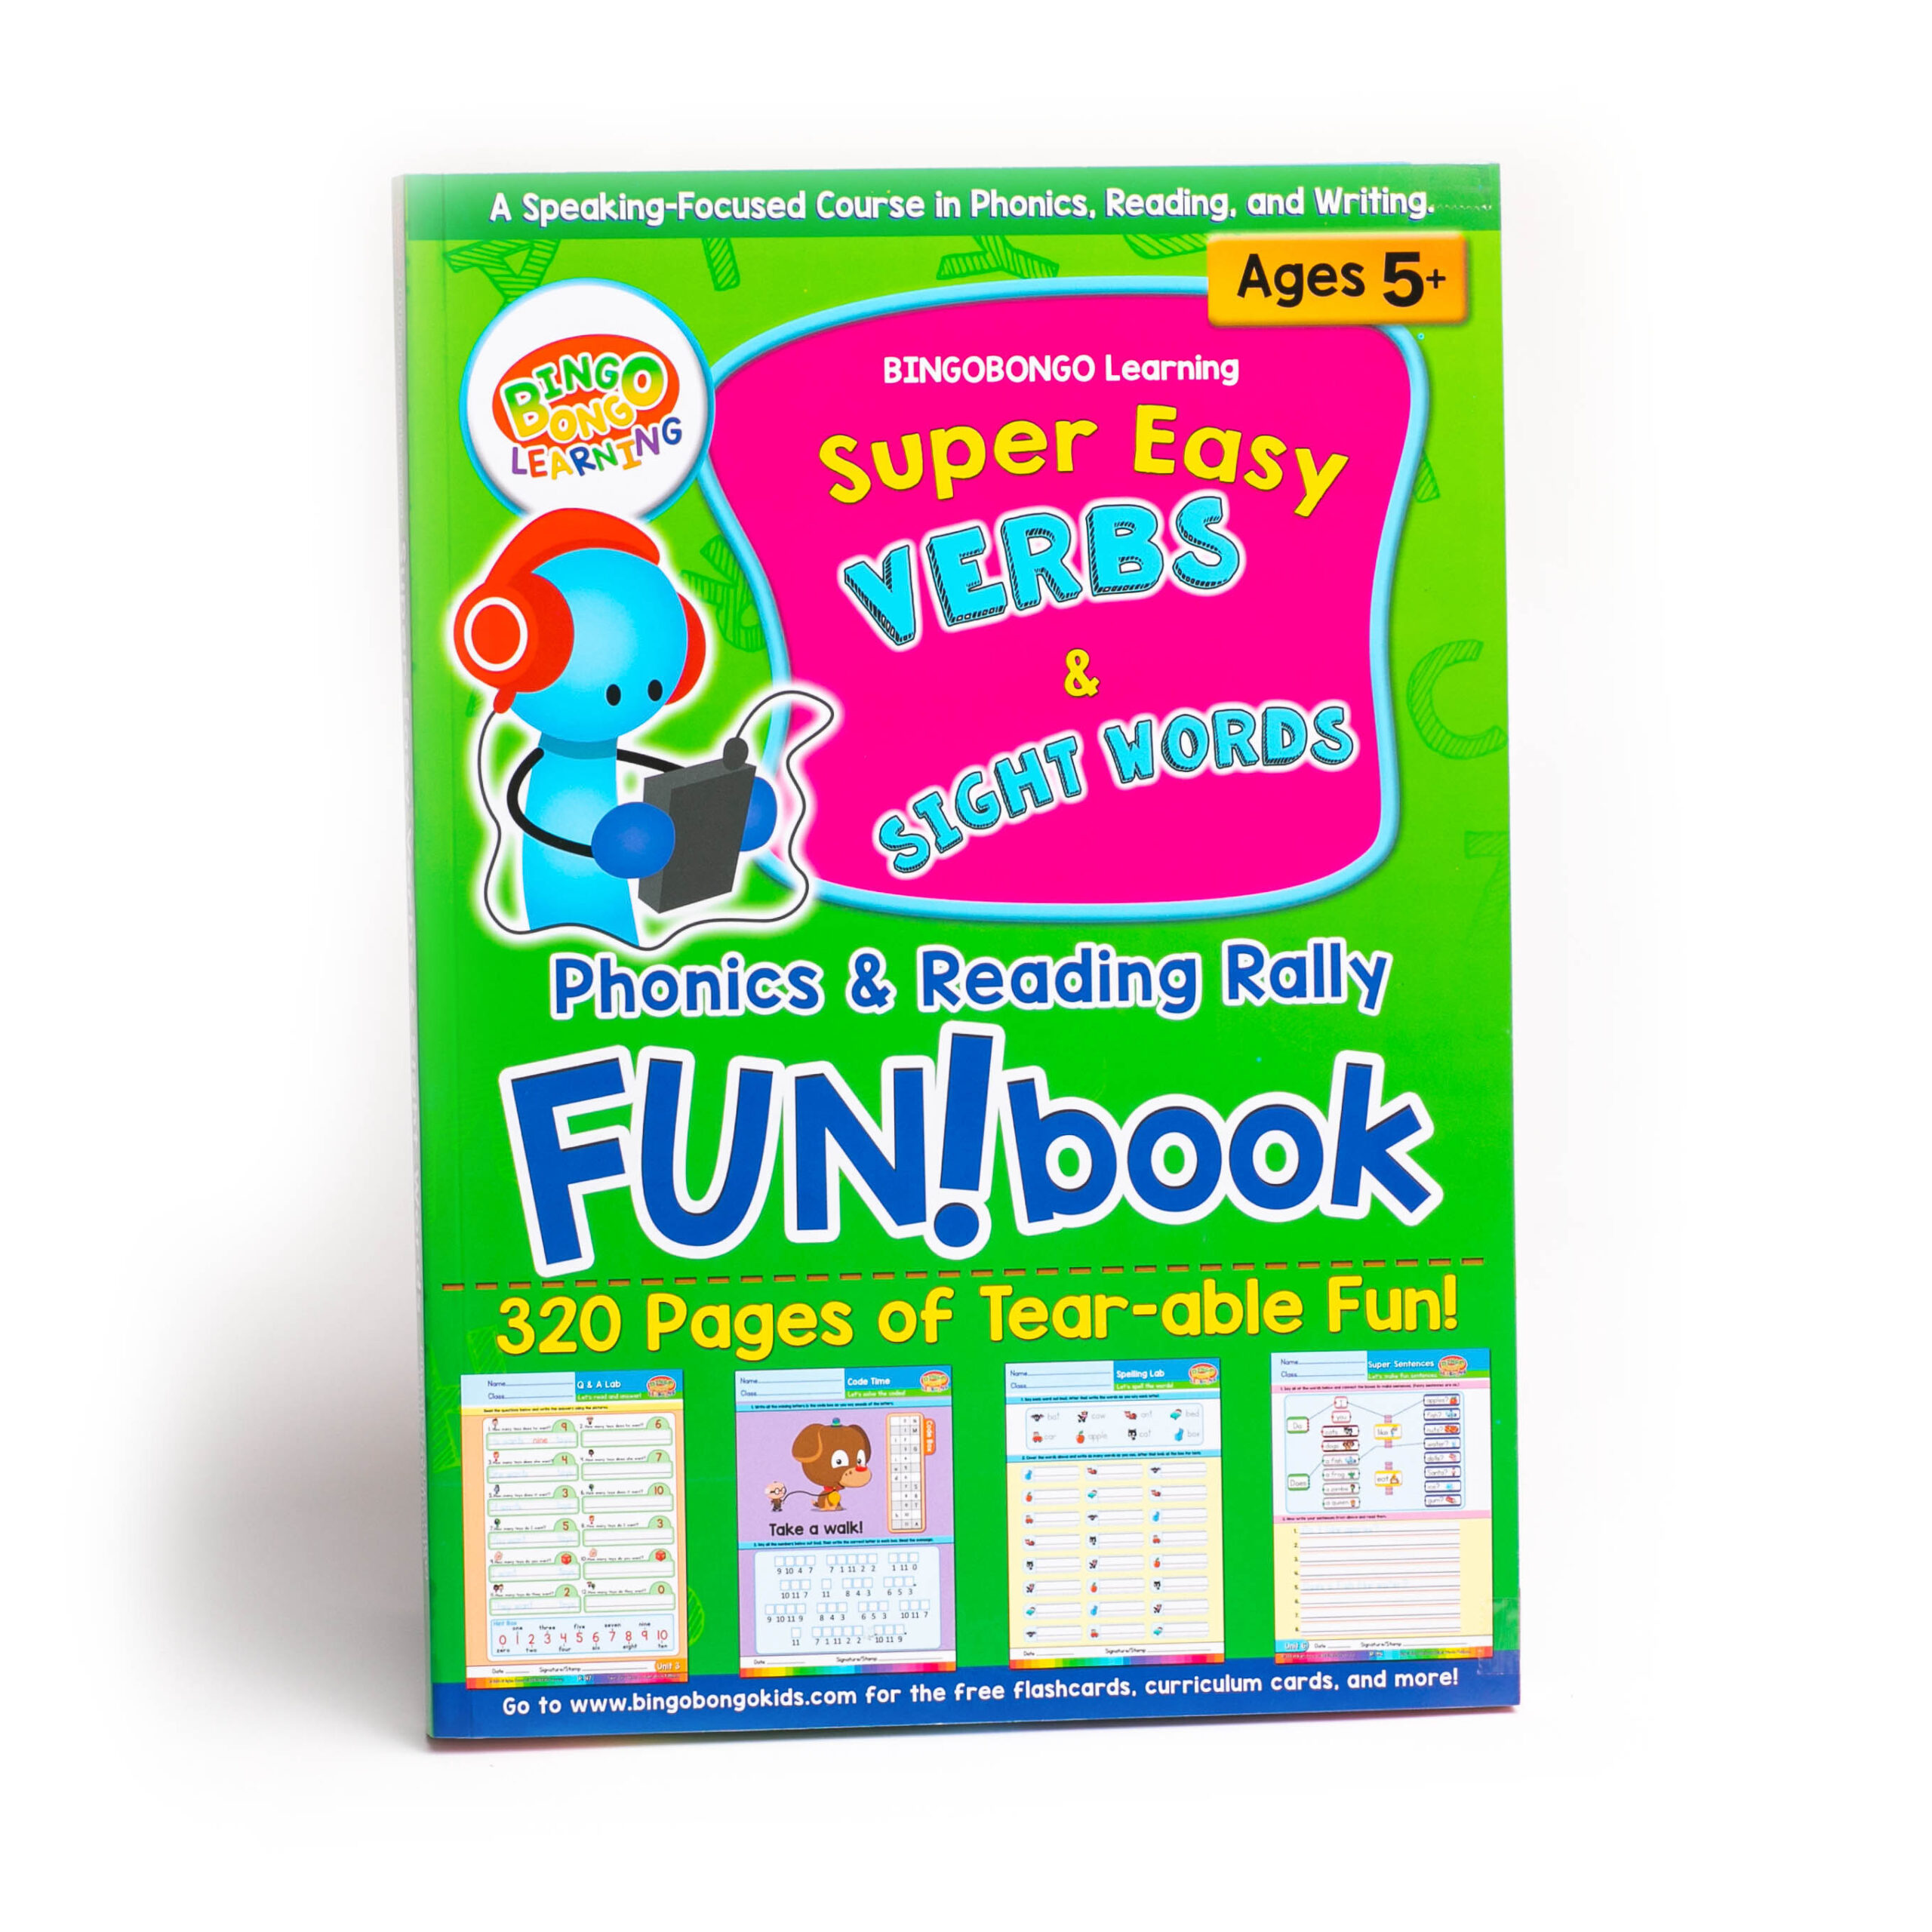 fb2 FUNBOOK2 COVER 600